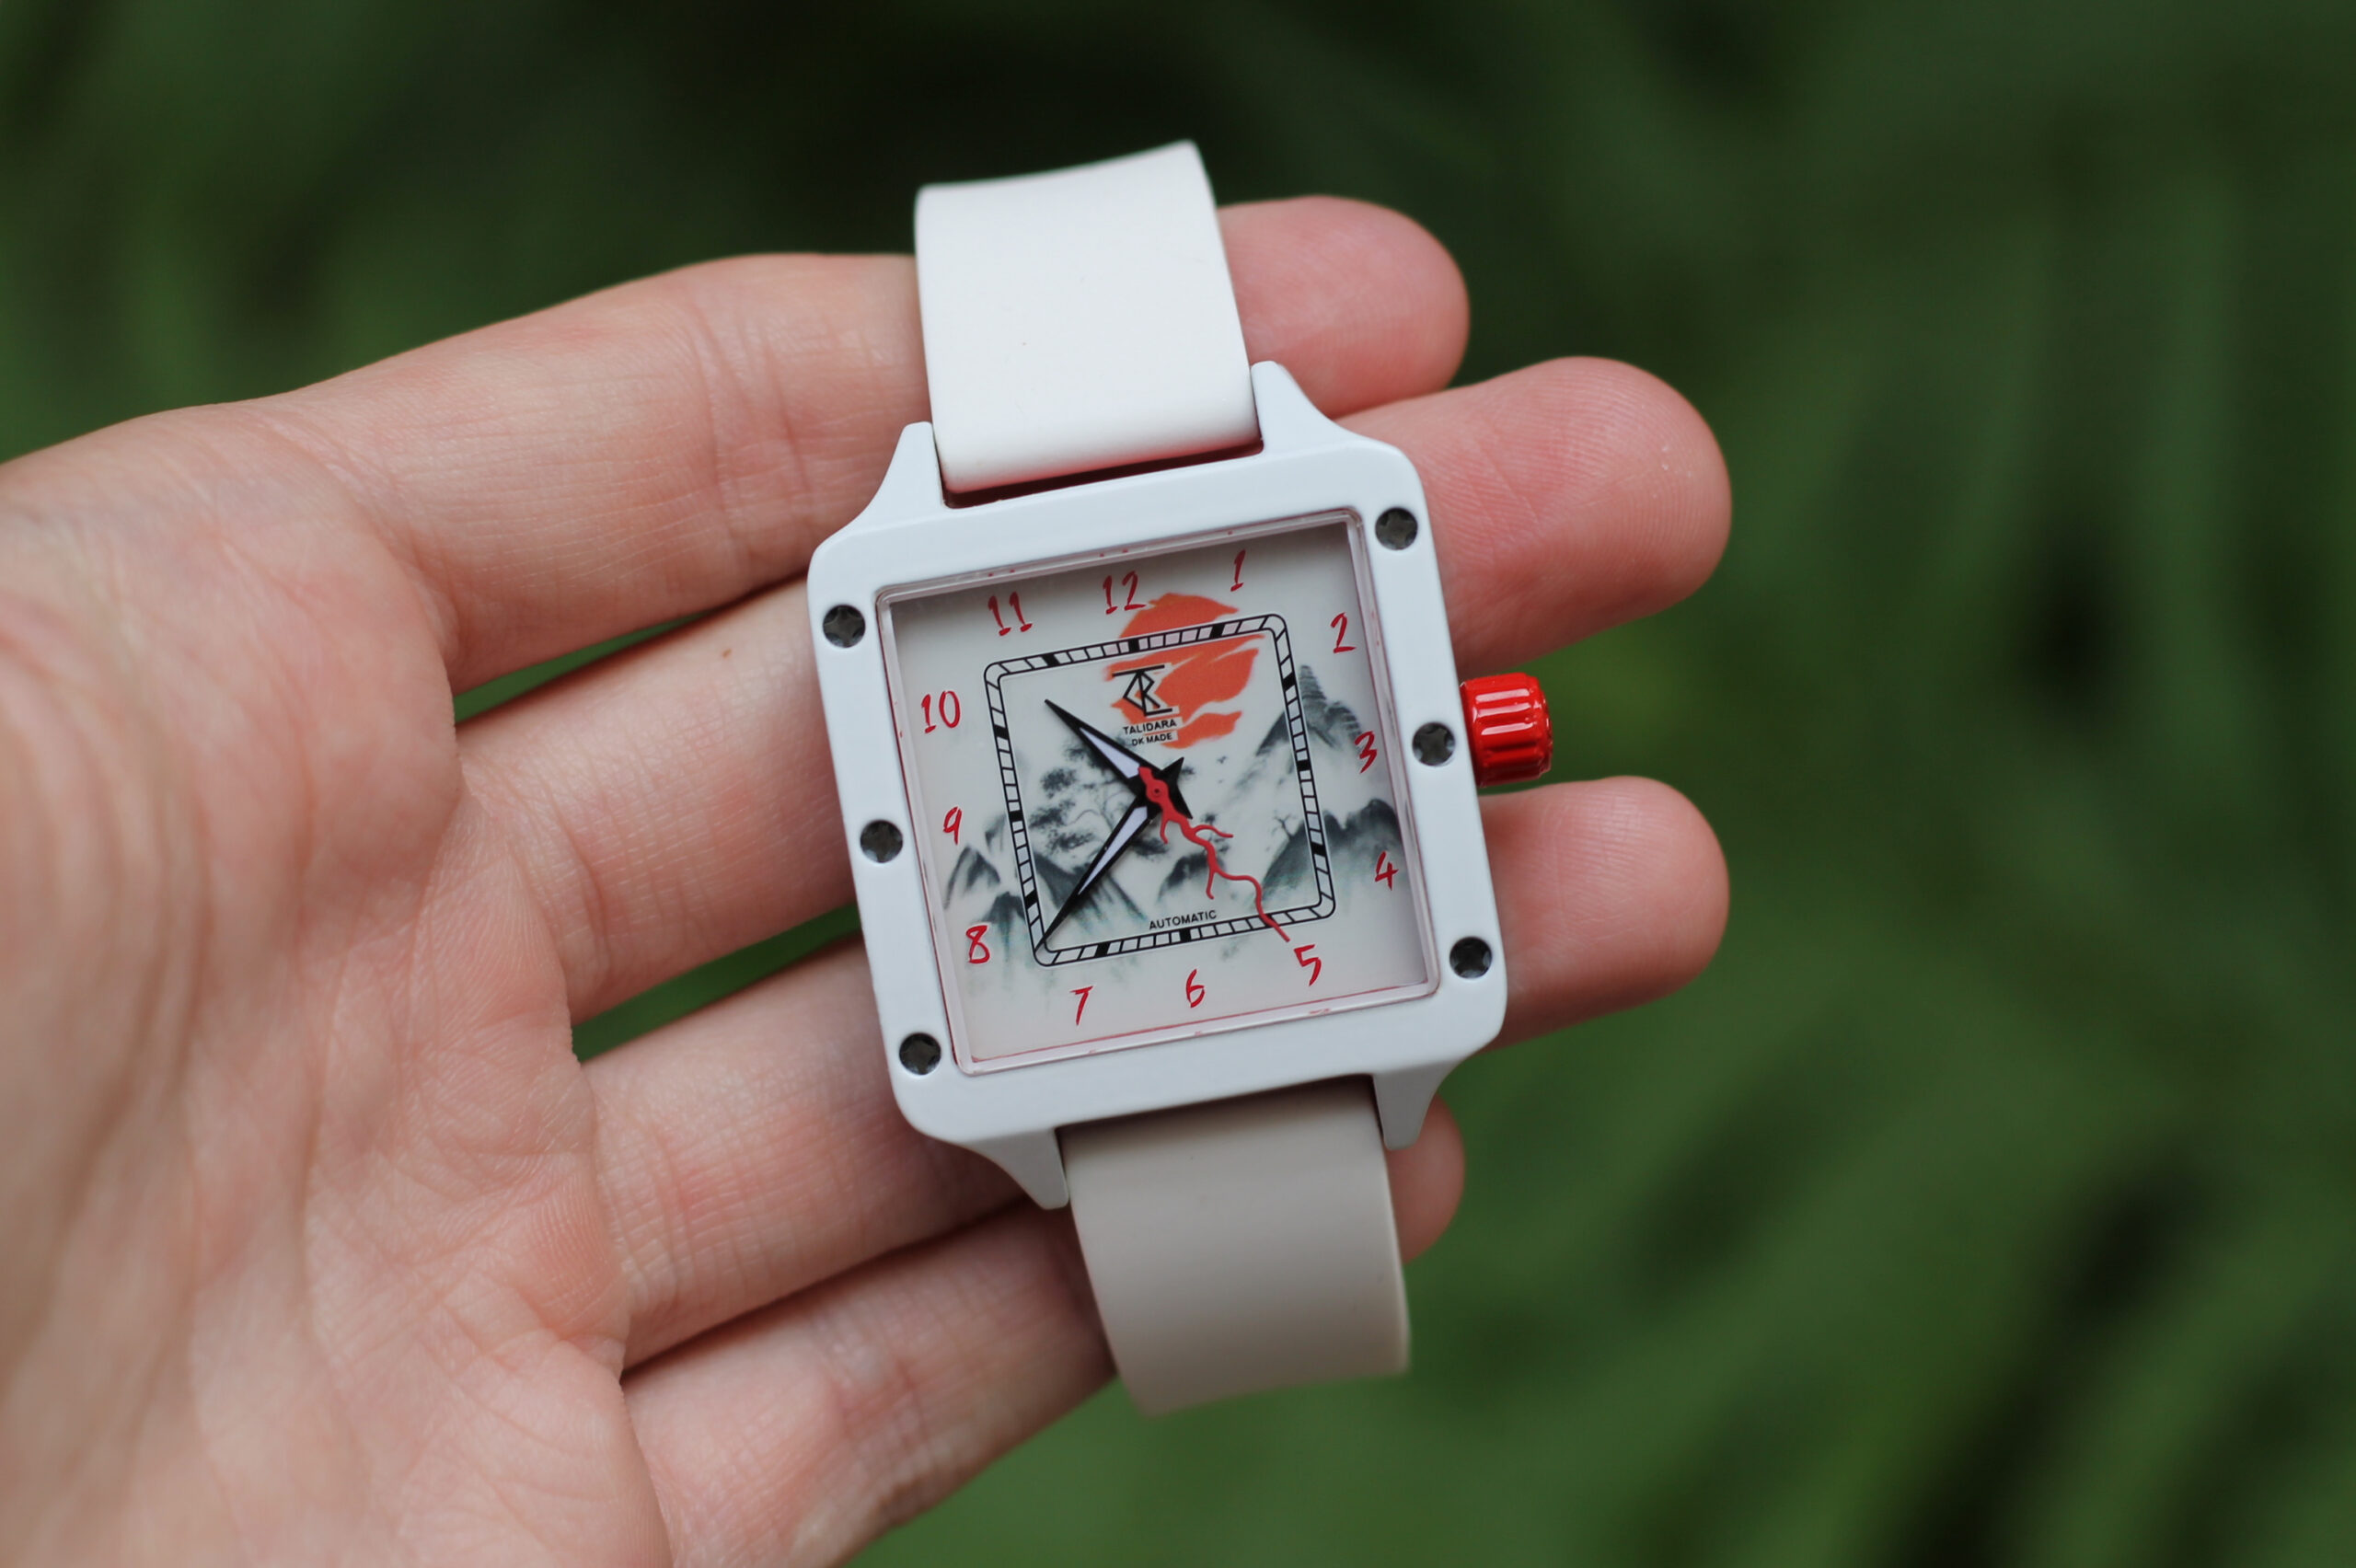 Talidara’s Heiwa Watch Adds the Perfect Amount of Flash to Any Outfit